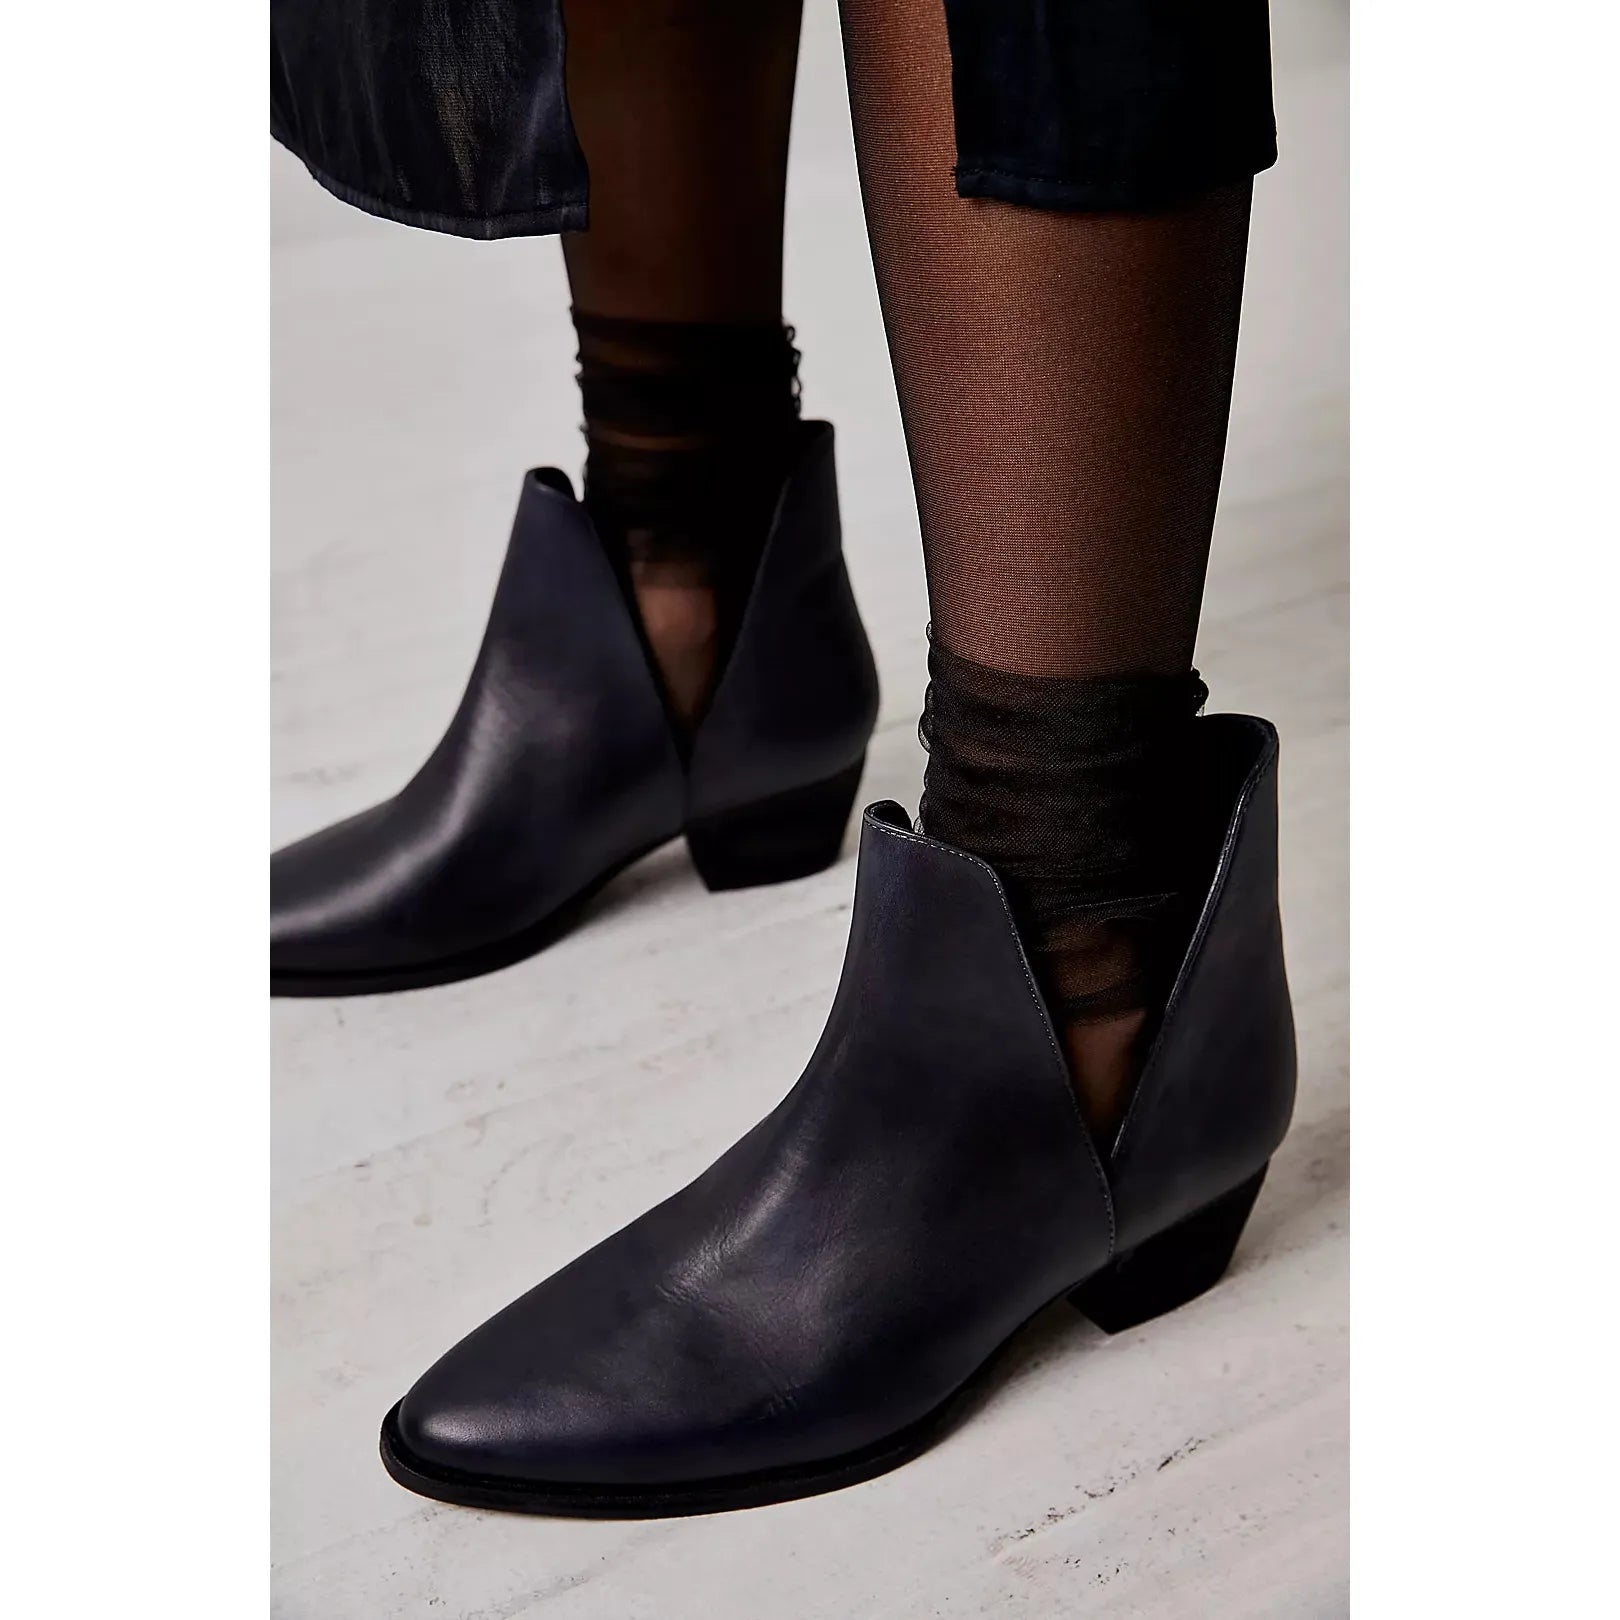 Free people back strap ankle leather boots